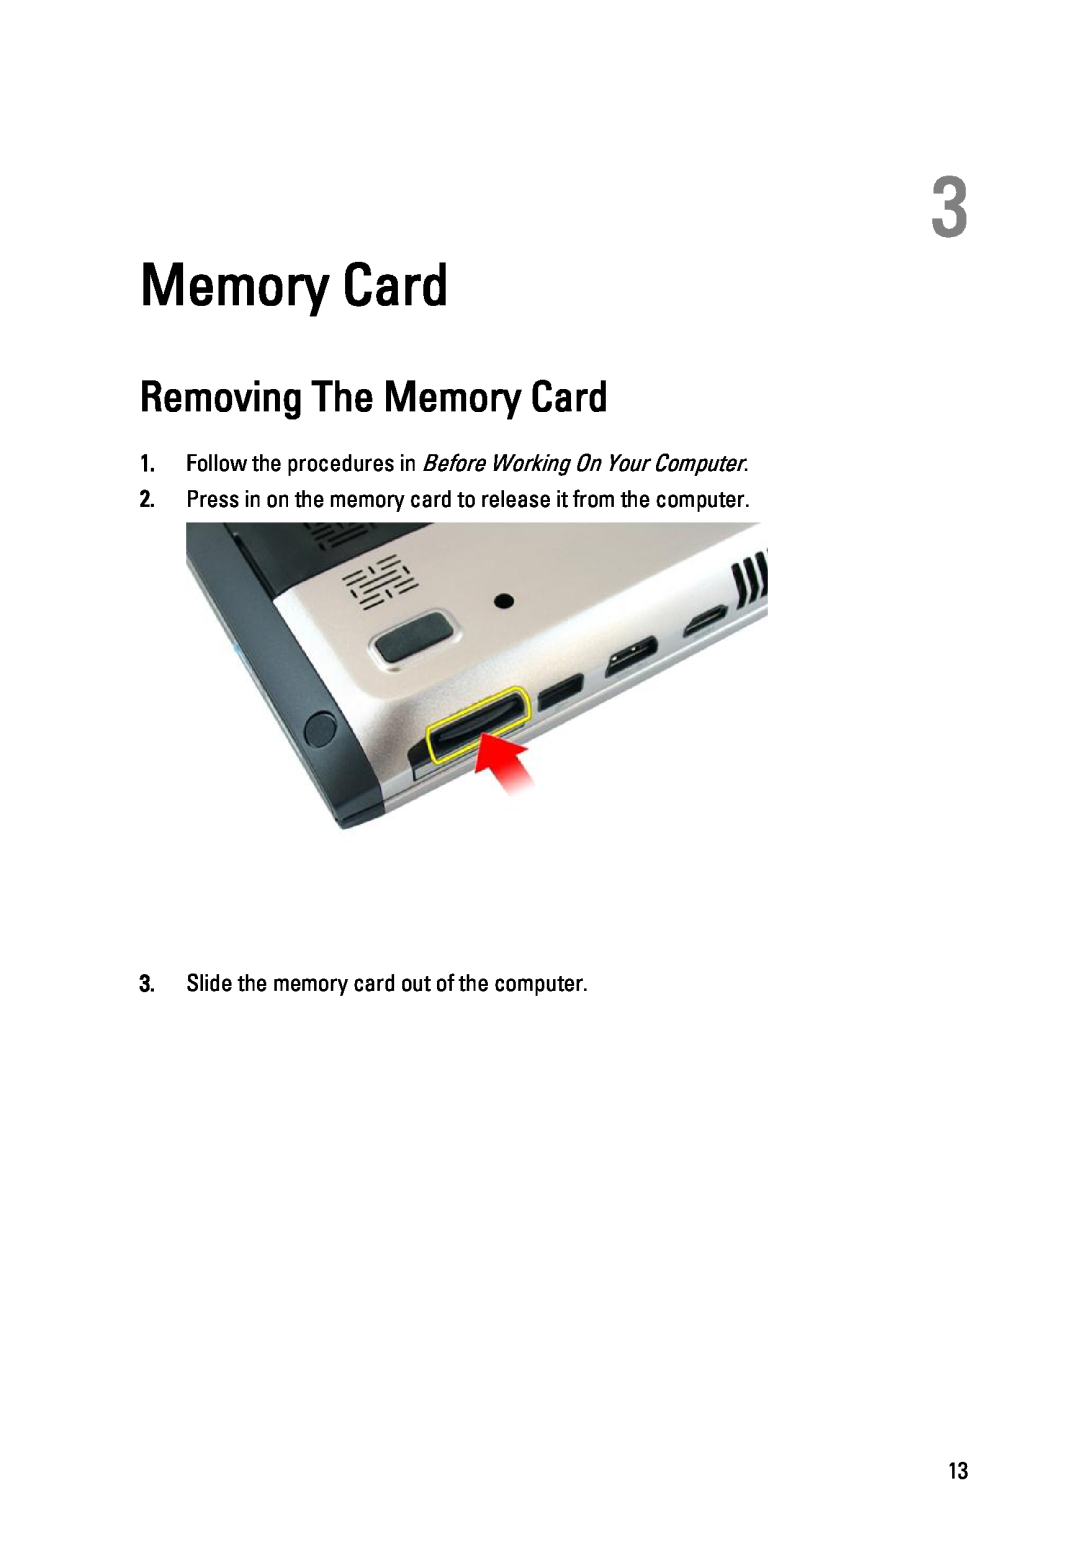 Dell 3450 owner manual Removing The Memory Card, Press in on the memory card to release it from the computer 